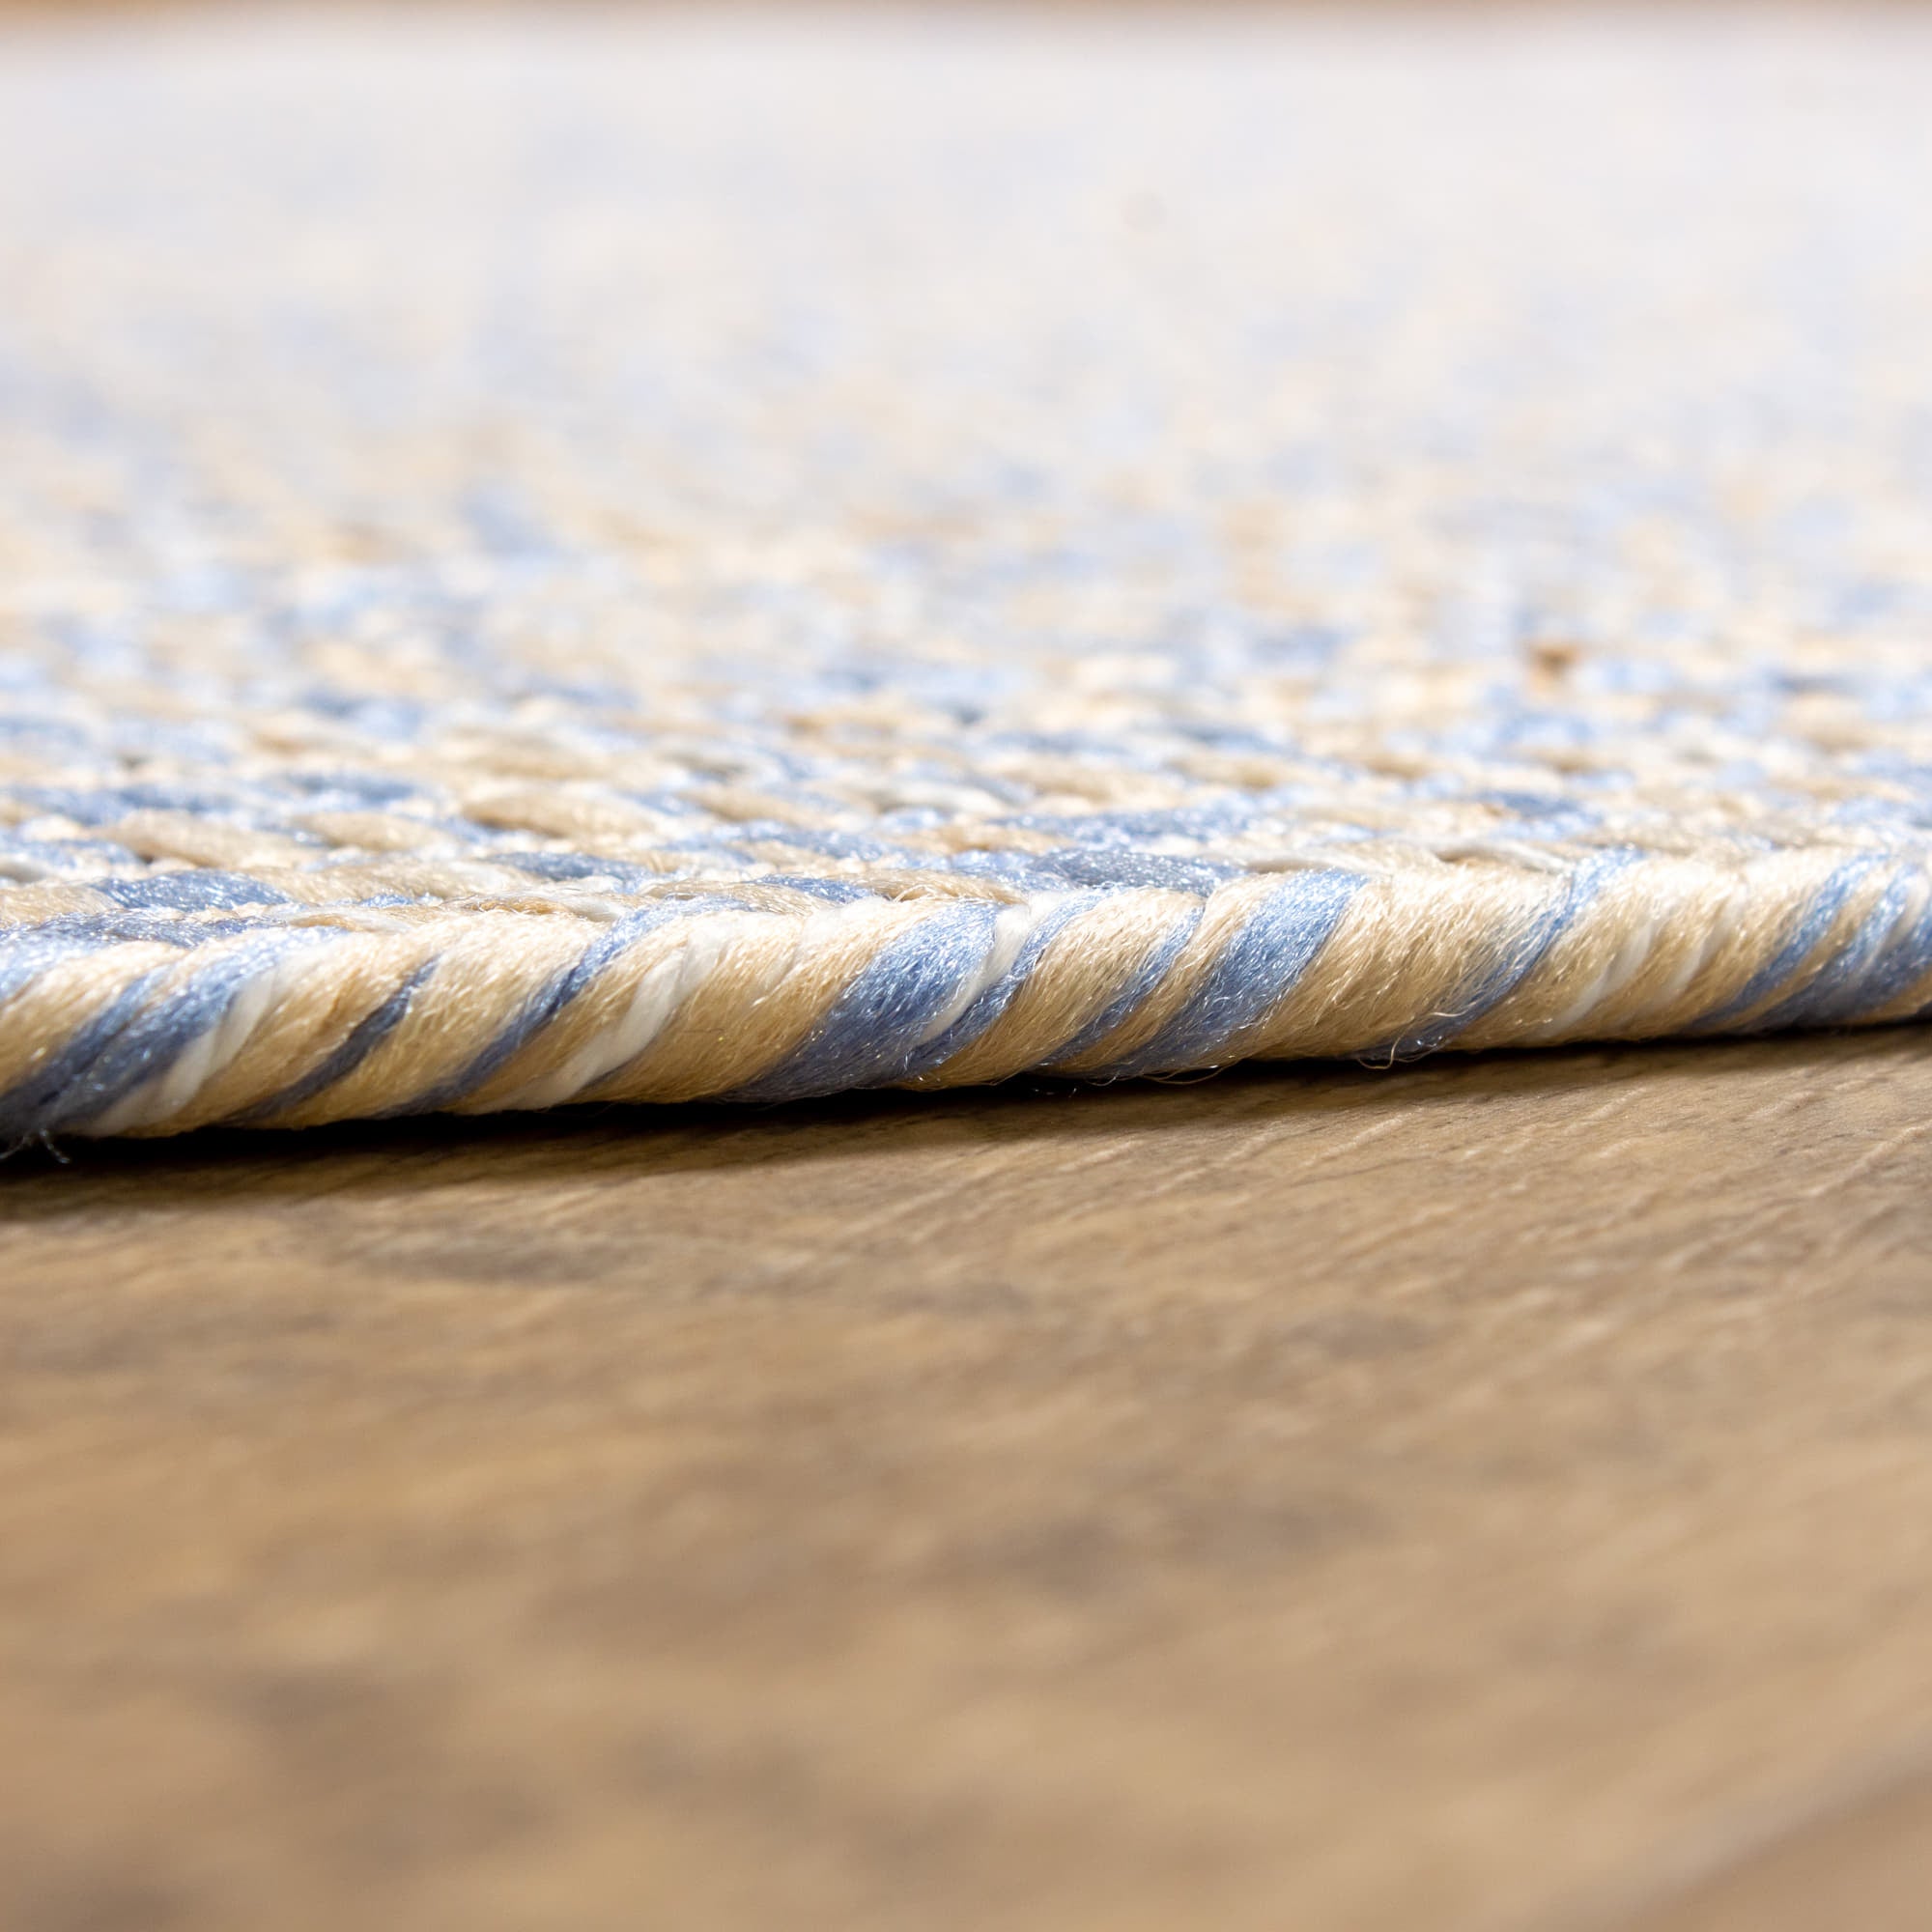 Cantebury CAN01F Blue, Beige Braided Rug #color_blue, beige